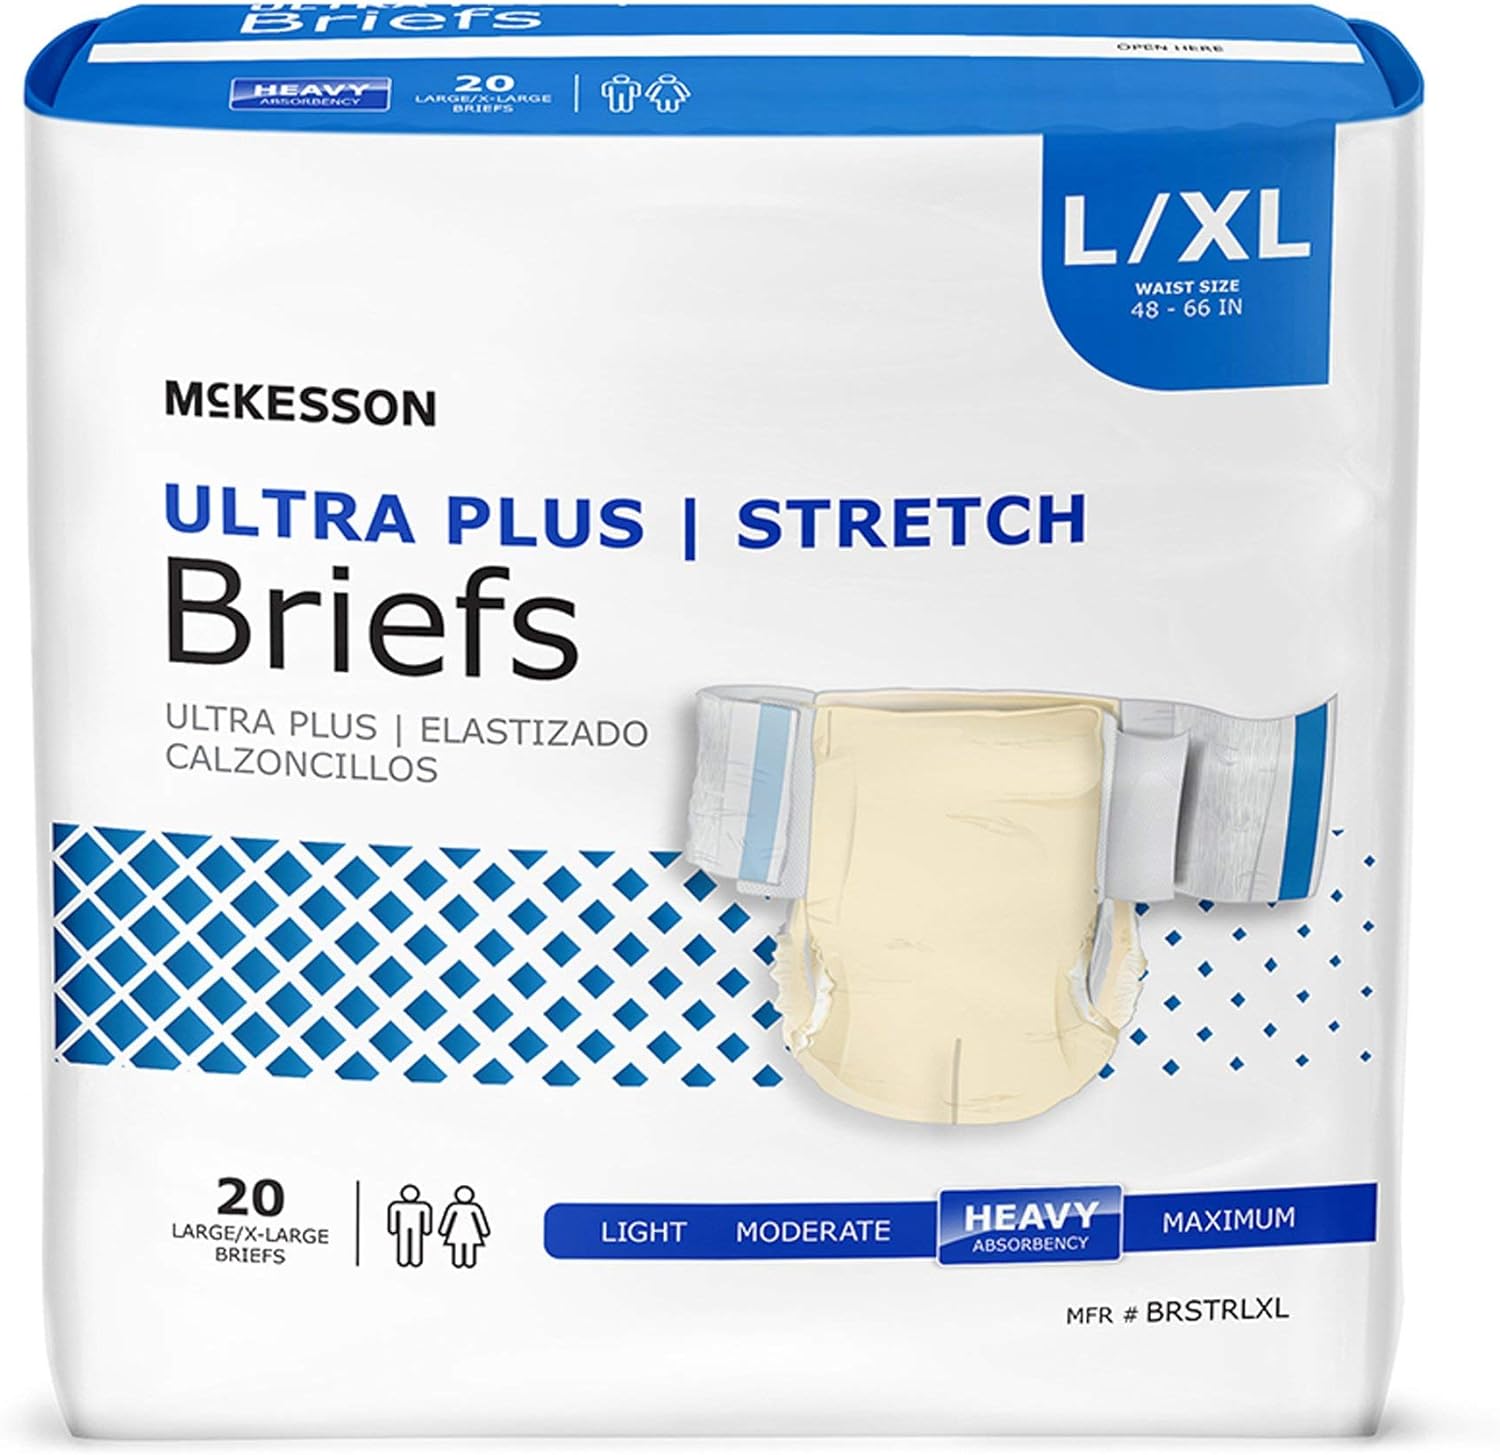 McKesson Ultra Plus Stretch Briefs, Incontinence, Heavy Absorbency, XL, 20 Count, 1 Pack